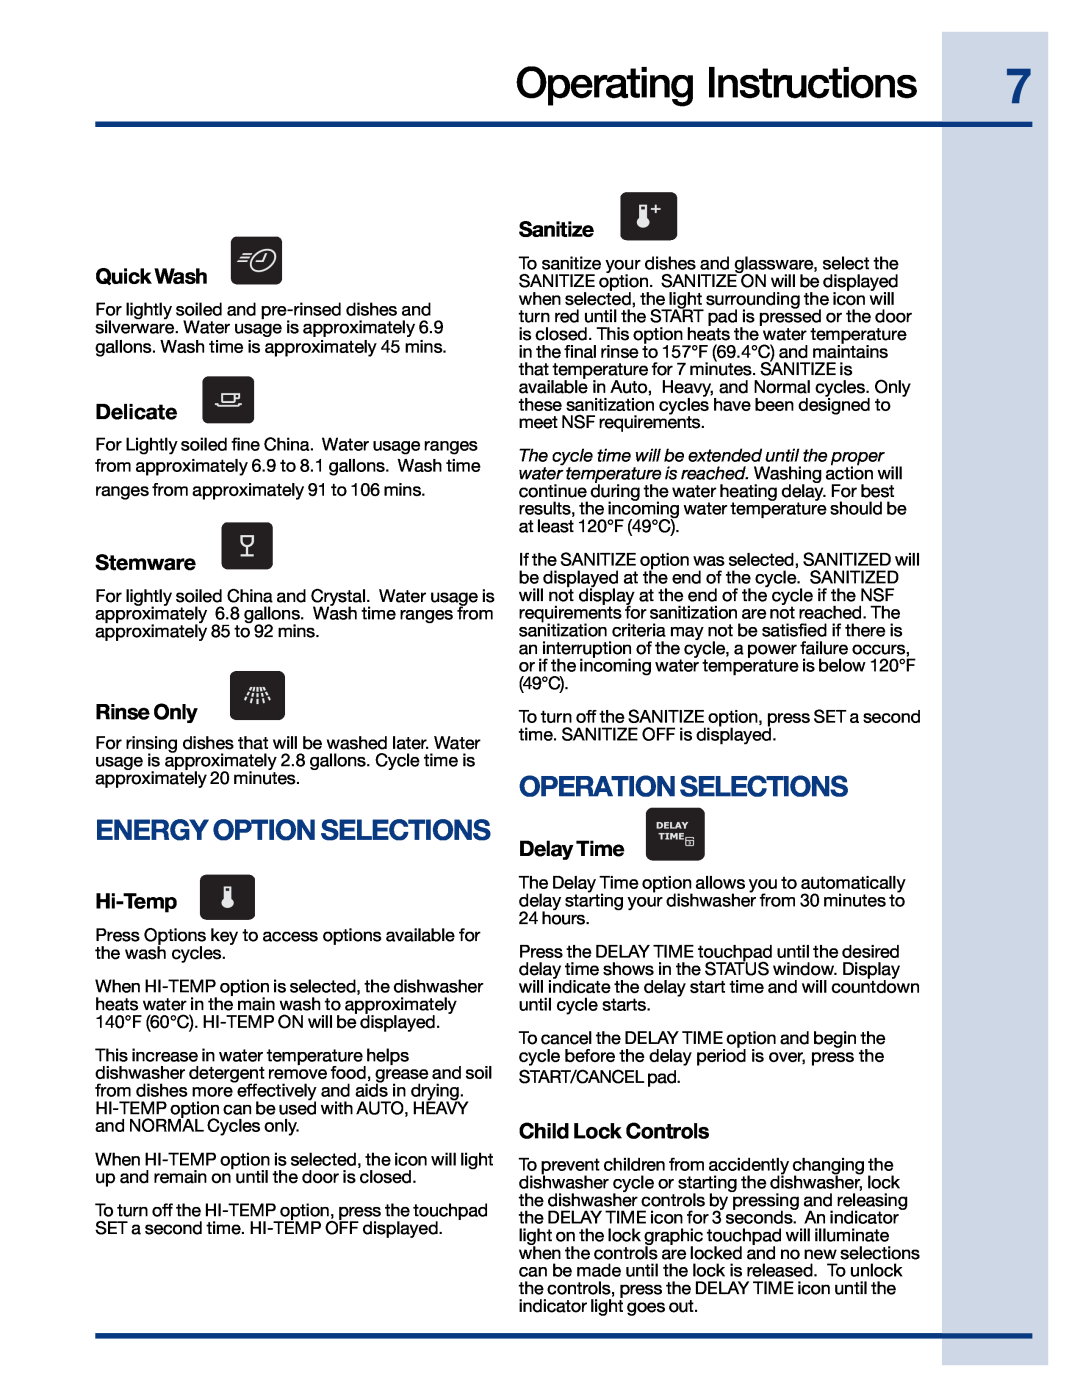 Electrolux 24 manual Energy Option Selections, Operation Selections, Quick Wash, Delicate, Stemware, Rinse Only, Hi-Temp 